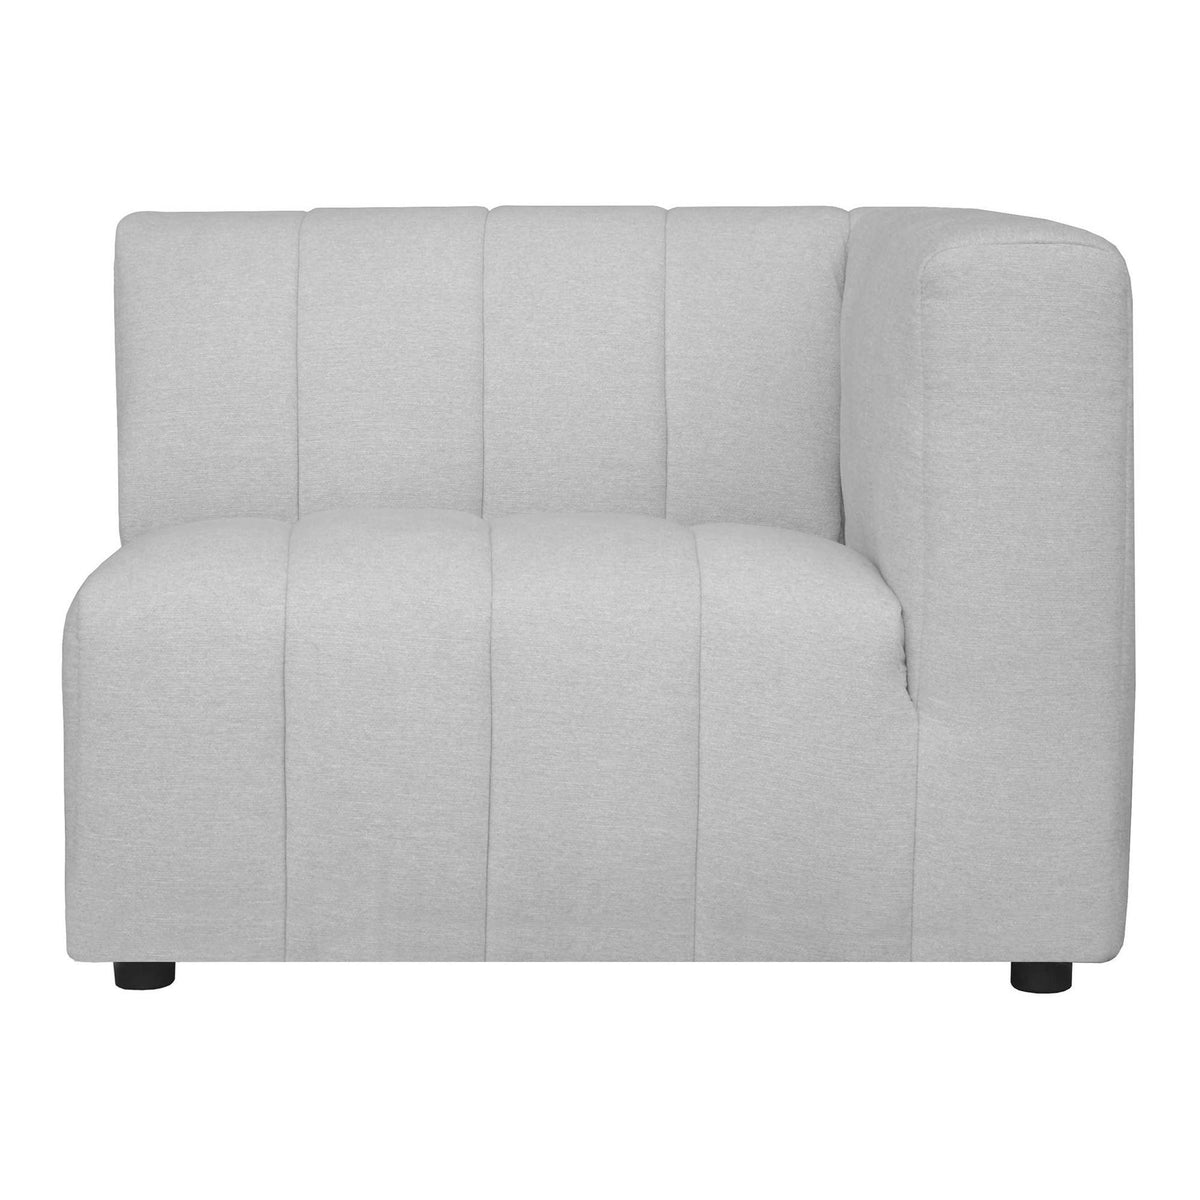 Moe's Home Collection Lyric Arm Chair Right Oatmeal - MT-1023-34